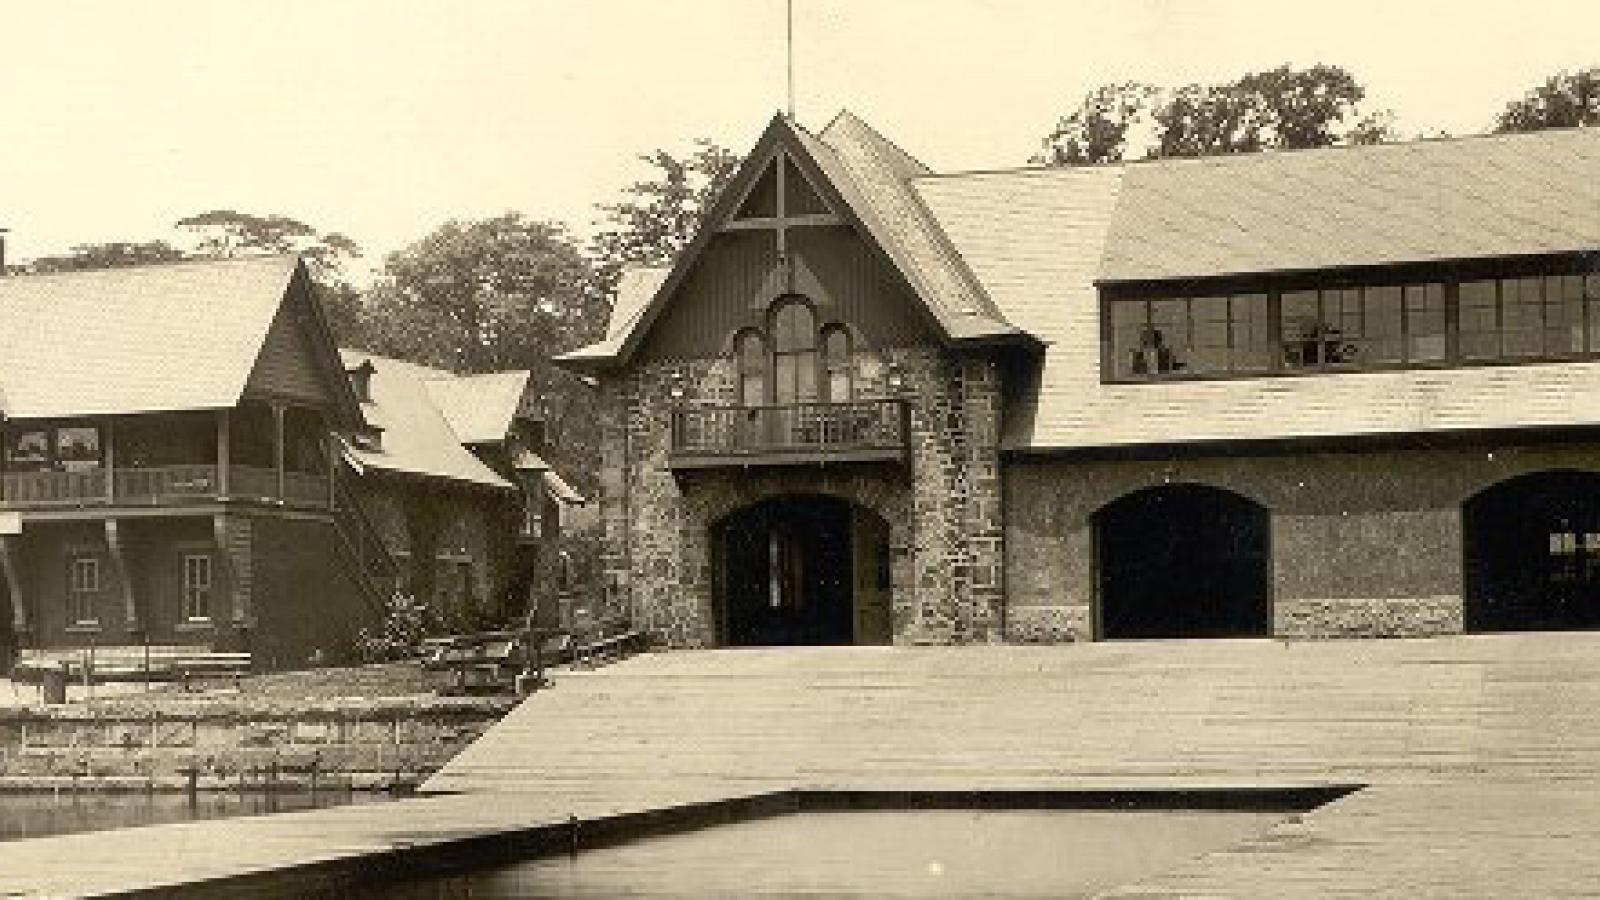 image from 1930 boathouse from Schuylkill